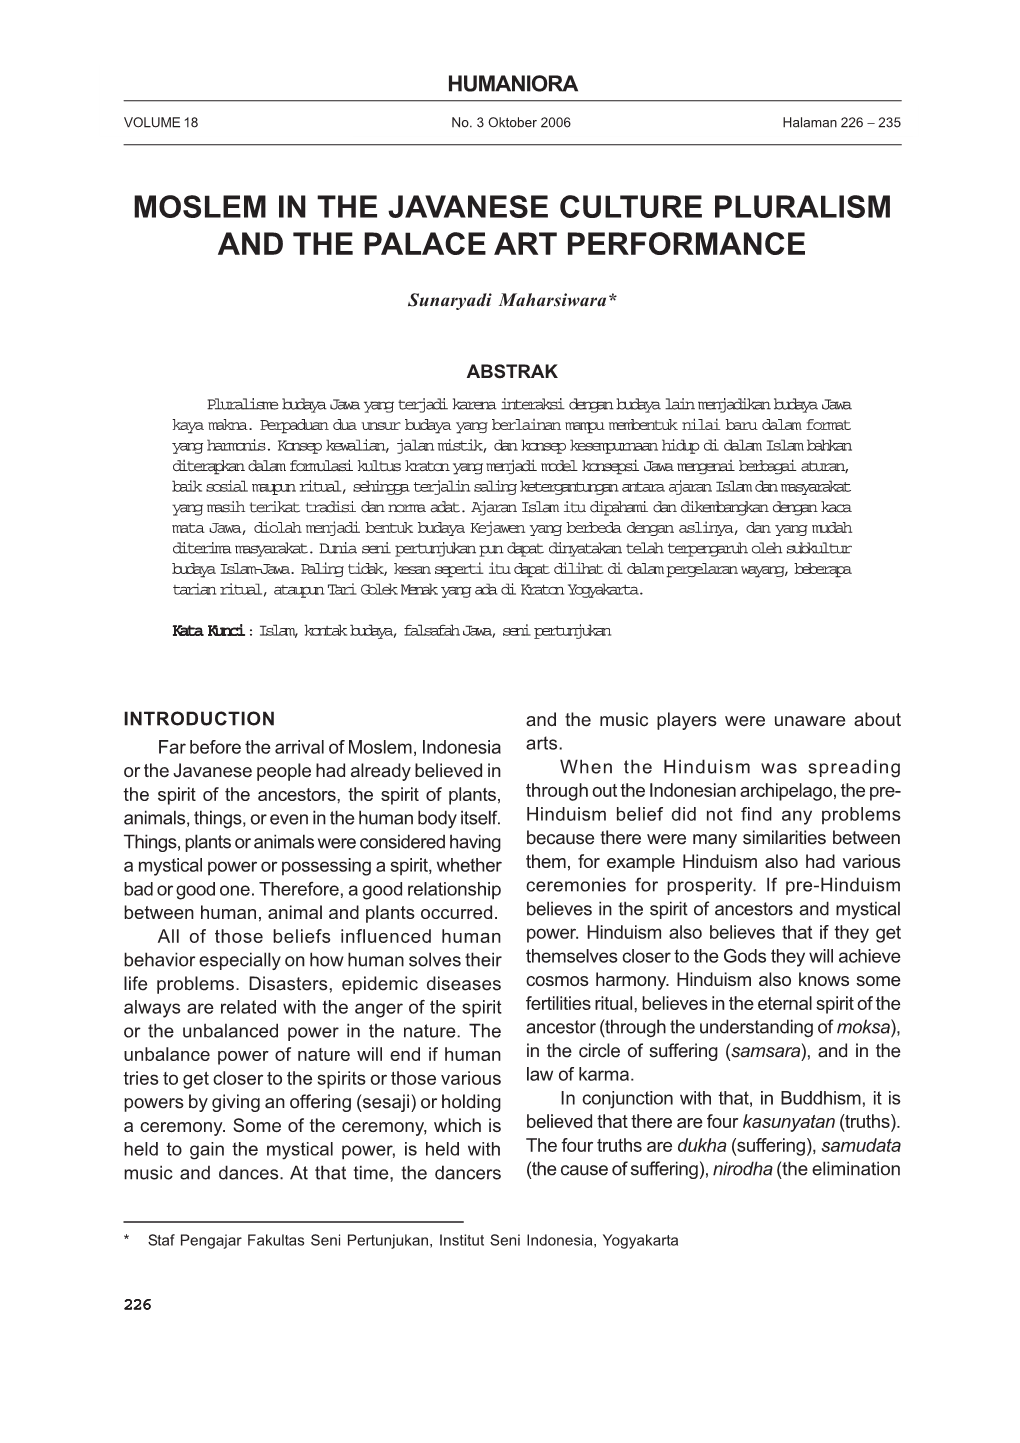 Moslem in the Javanese Culture Pluralism and the Palace Art Performance